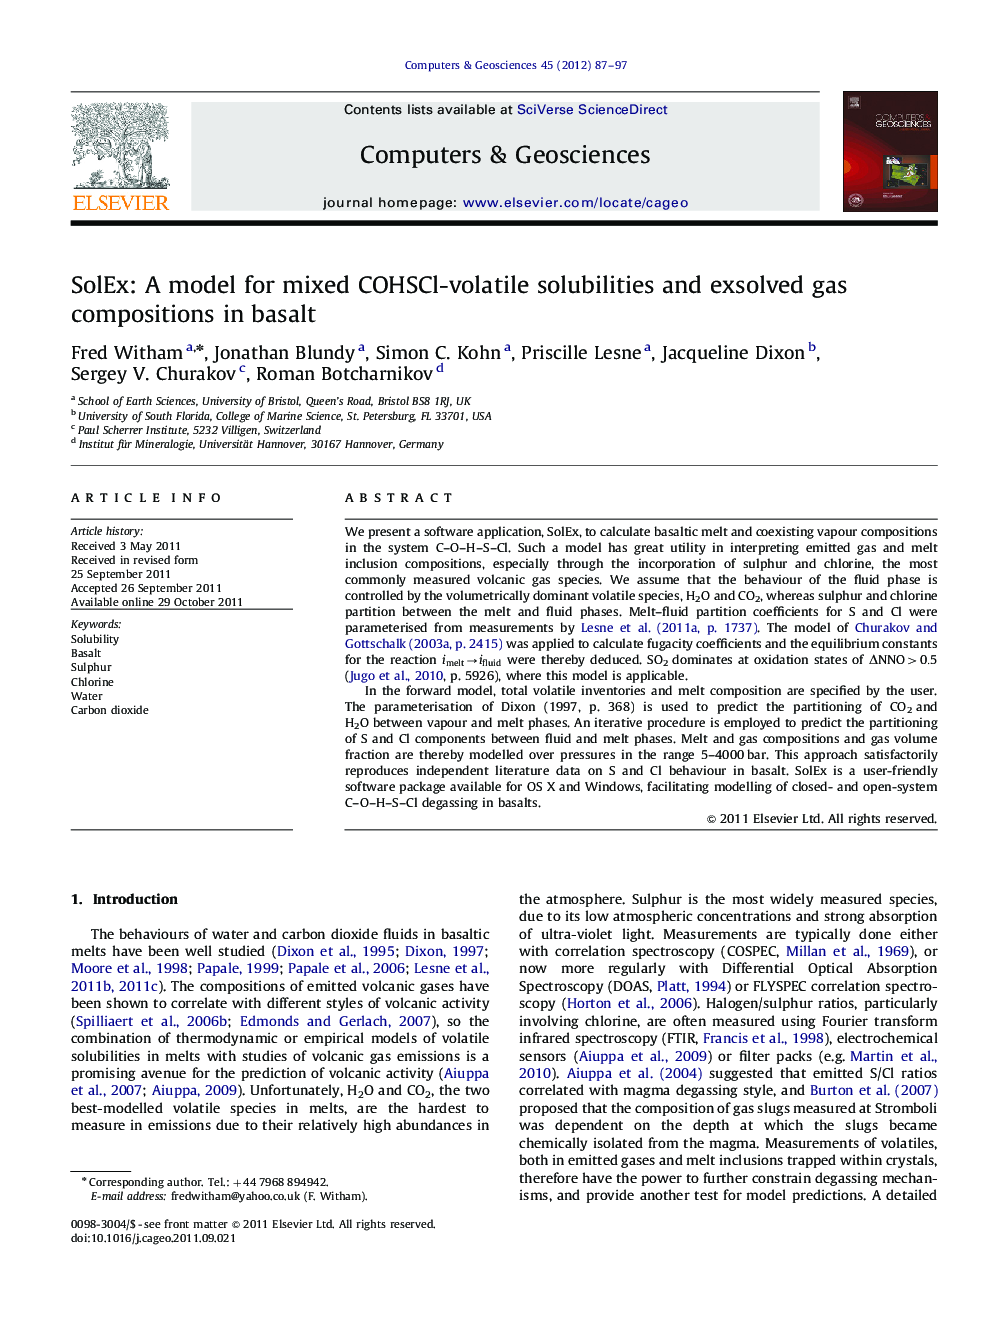 SolEx: A model for mixed COHSCl-volatile solubilities and exsolved gas compositions in basalt